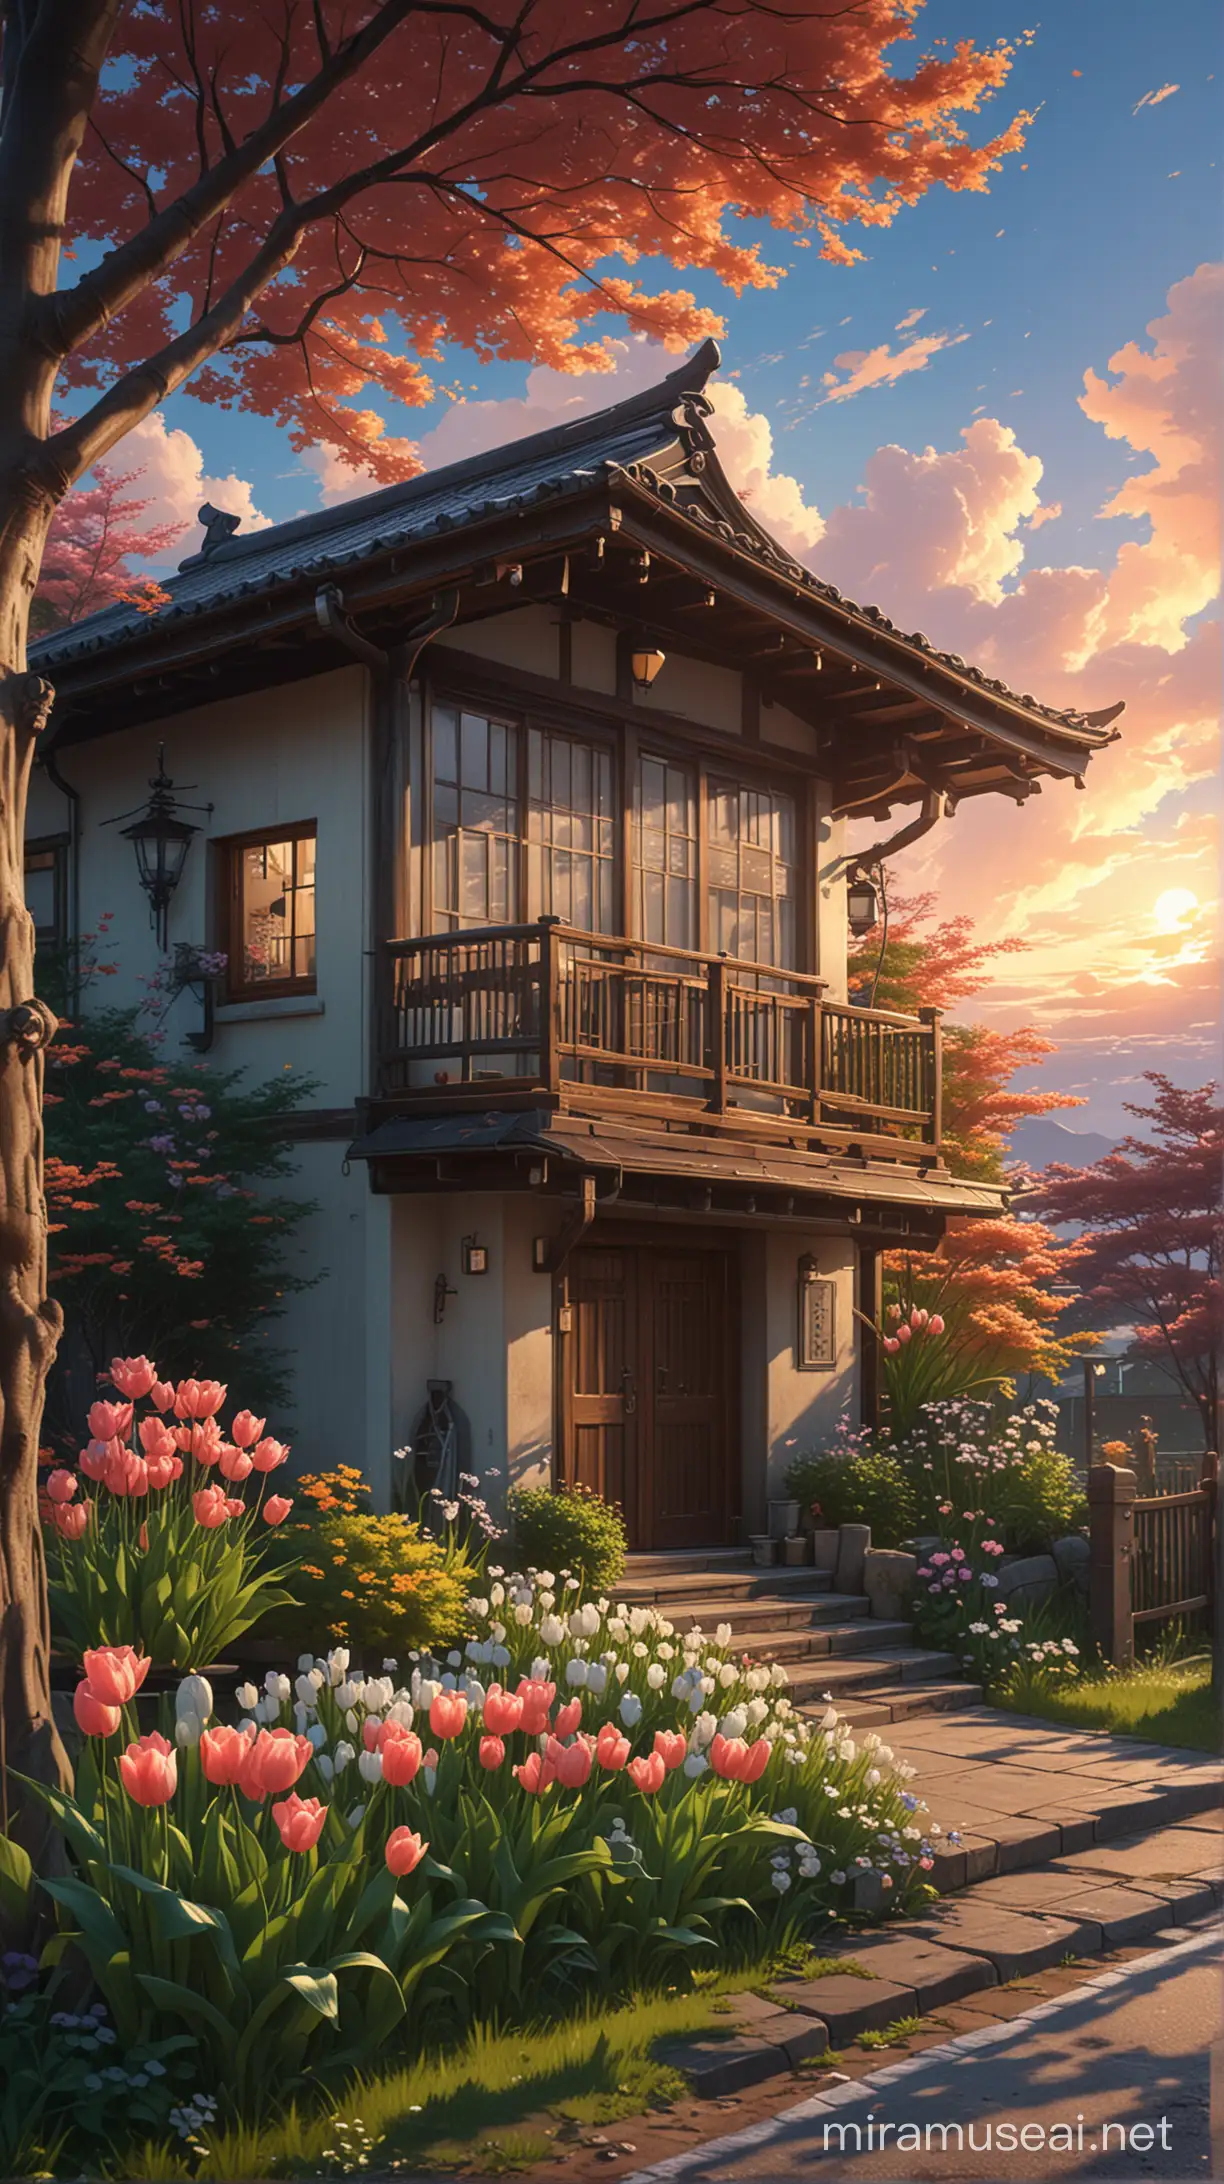 Tranquil Japanese House in Forest Sunset with Tulip Garden